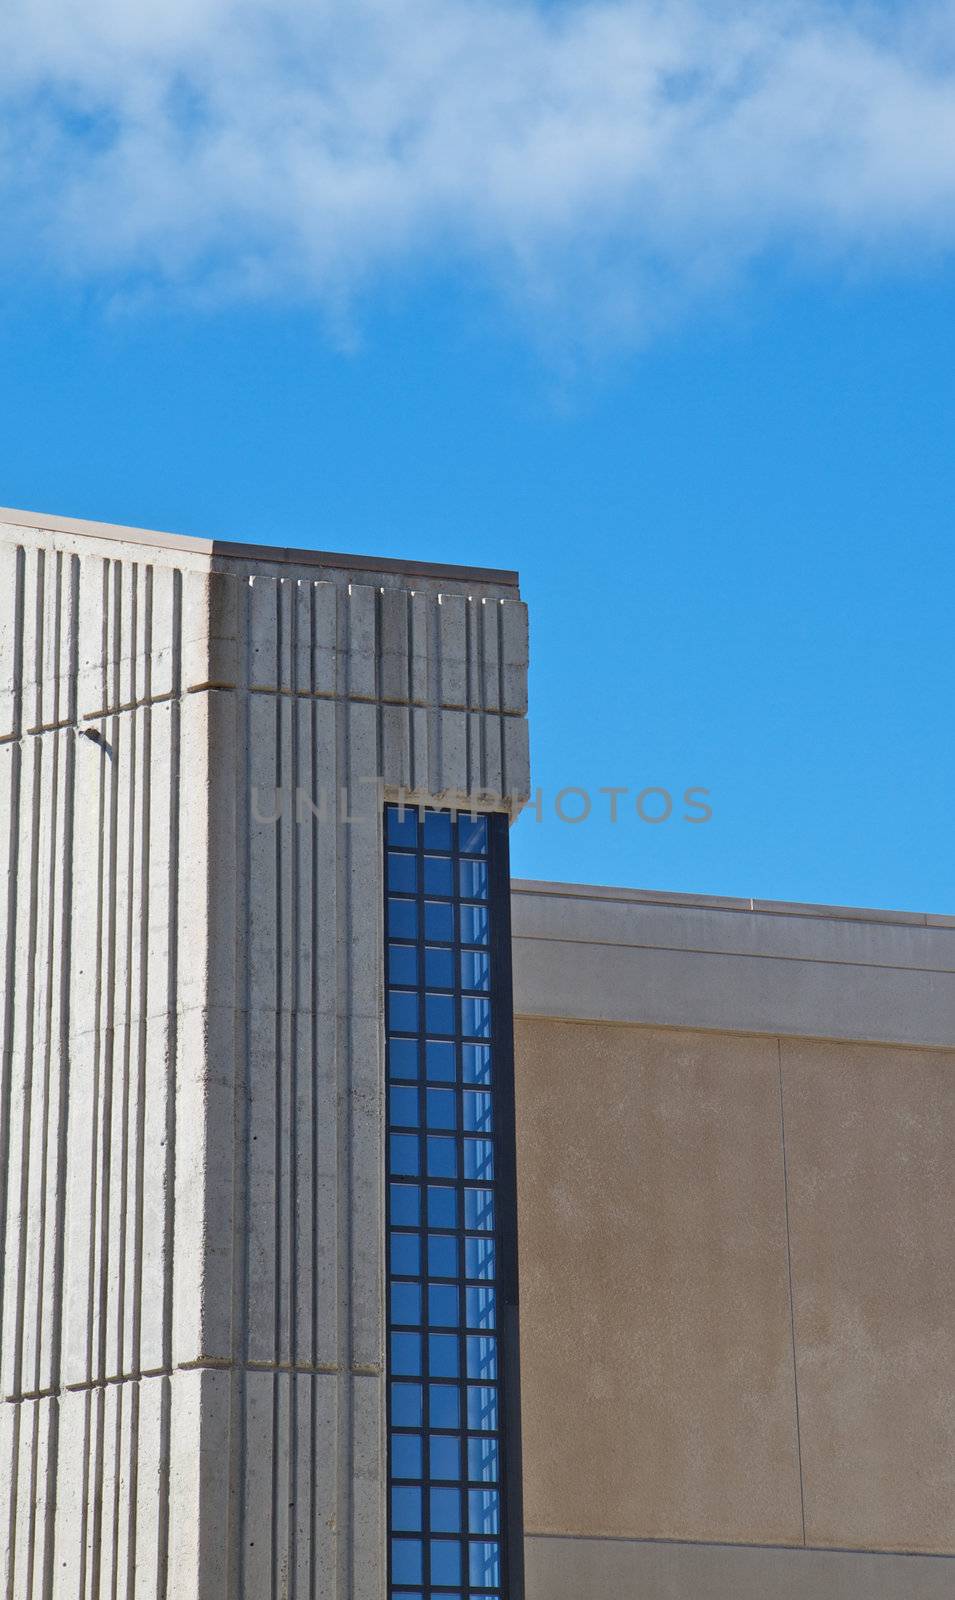 Vertical image of blue windowed concrete building with blue sky